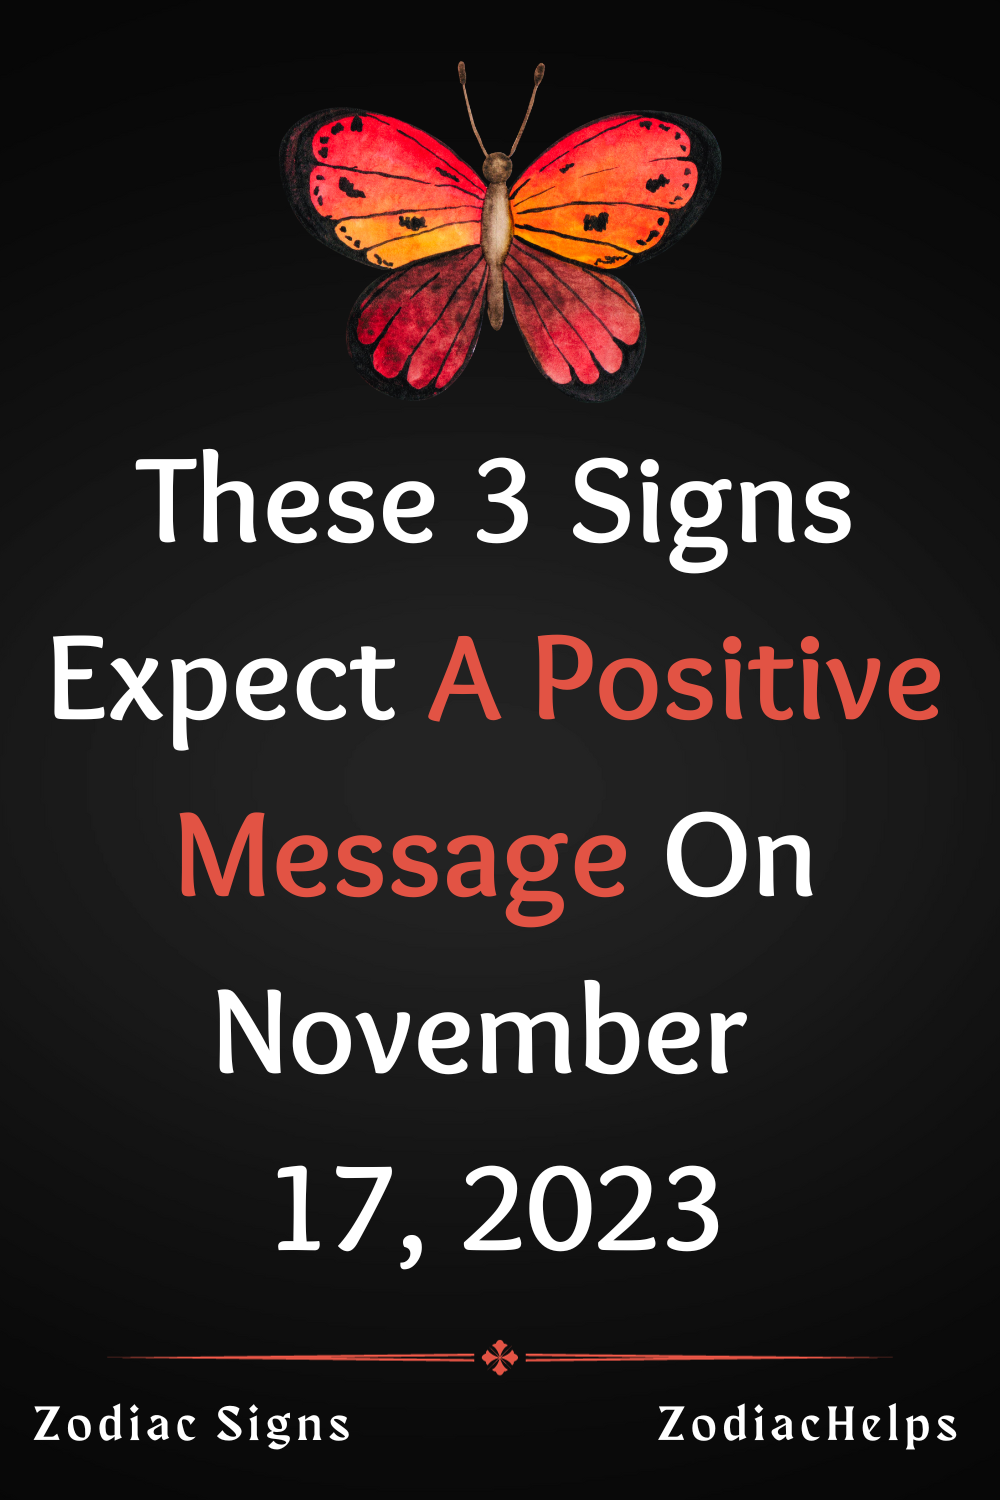 These 3 Signs Expect A Positive Message On November 17, 2023